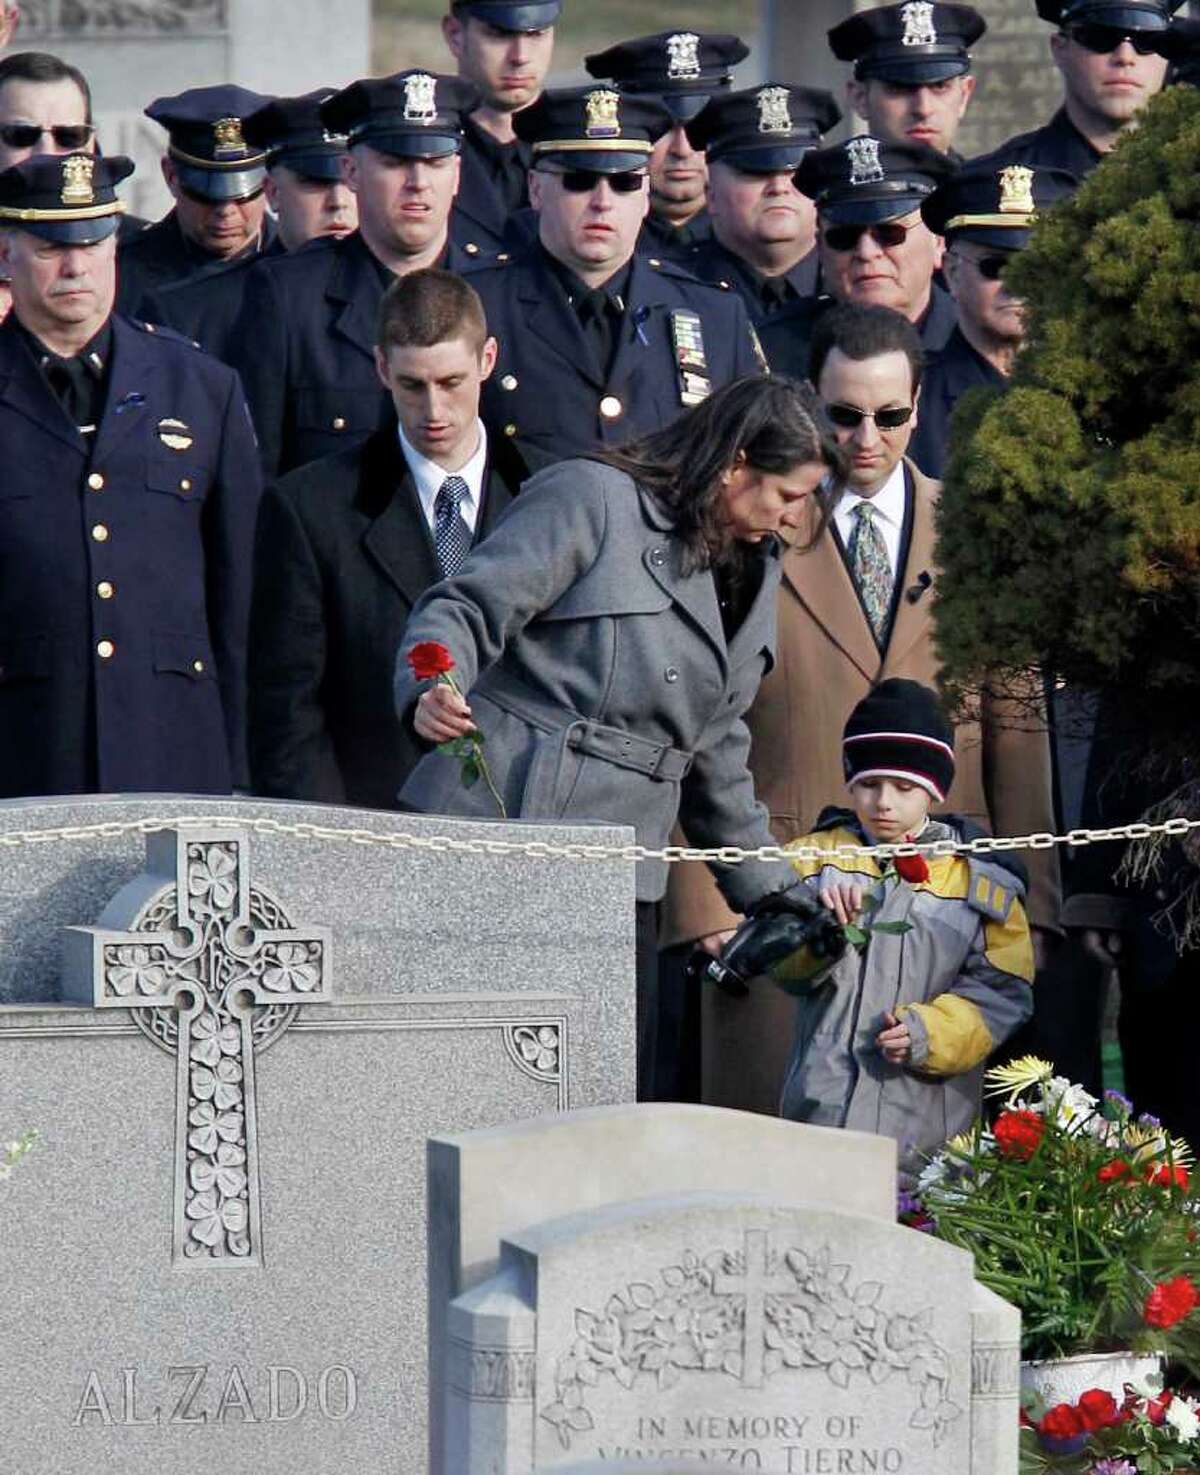 Relatives of slain Poughkeepsie police Detective John Falcone, 44, lay carnations at his gravesite during burial for the 14-year police veteran at Brooklyn's Holy Cross Cemetery in New York, Thursday, Feb. 24, 2011. Falcone was killed as he helped rescue a 3-year-old girl. (AP Photo/Kathy Willens)